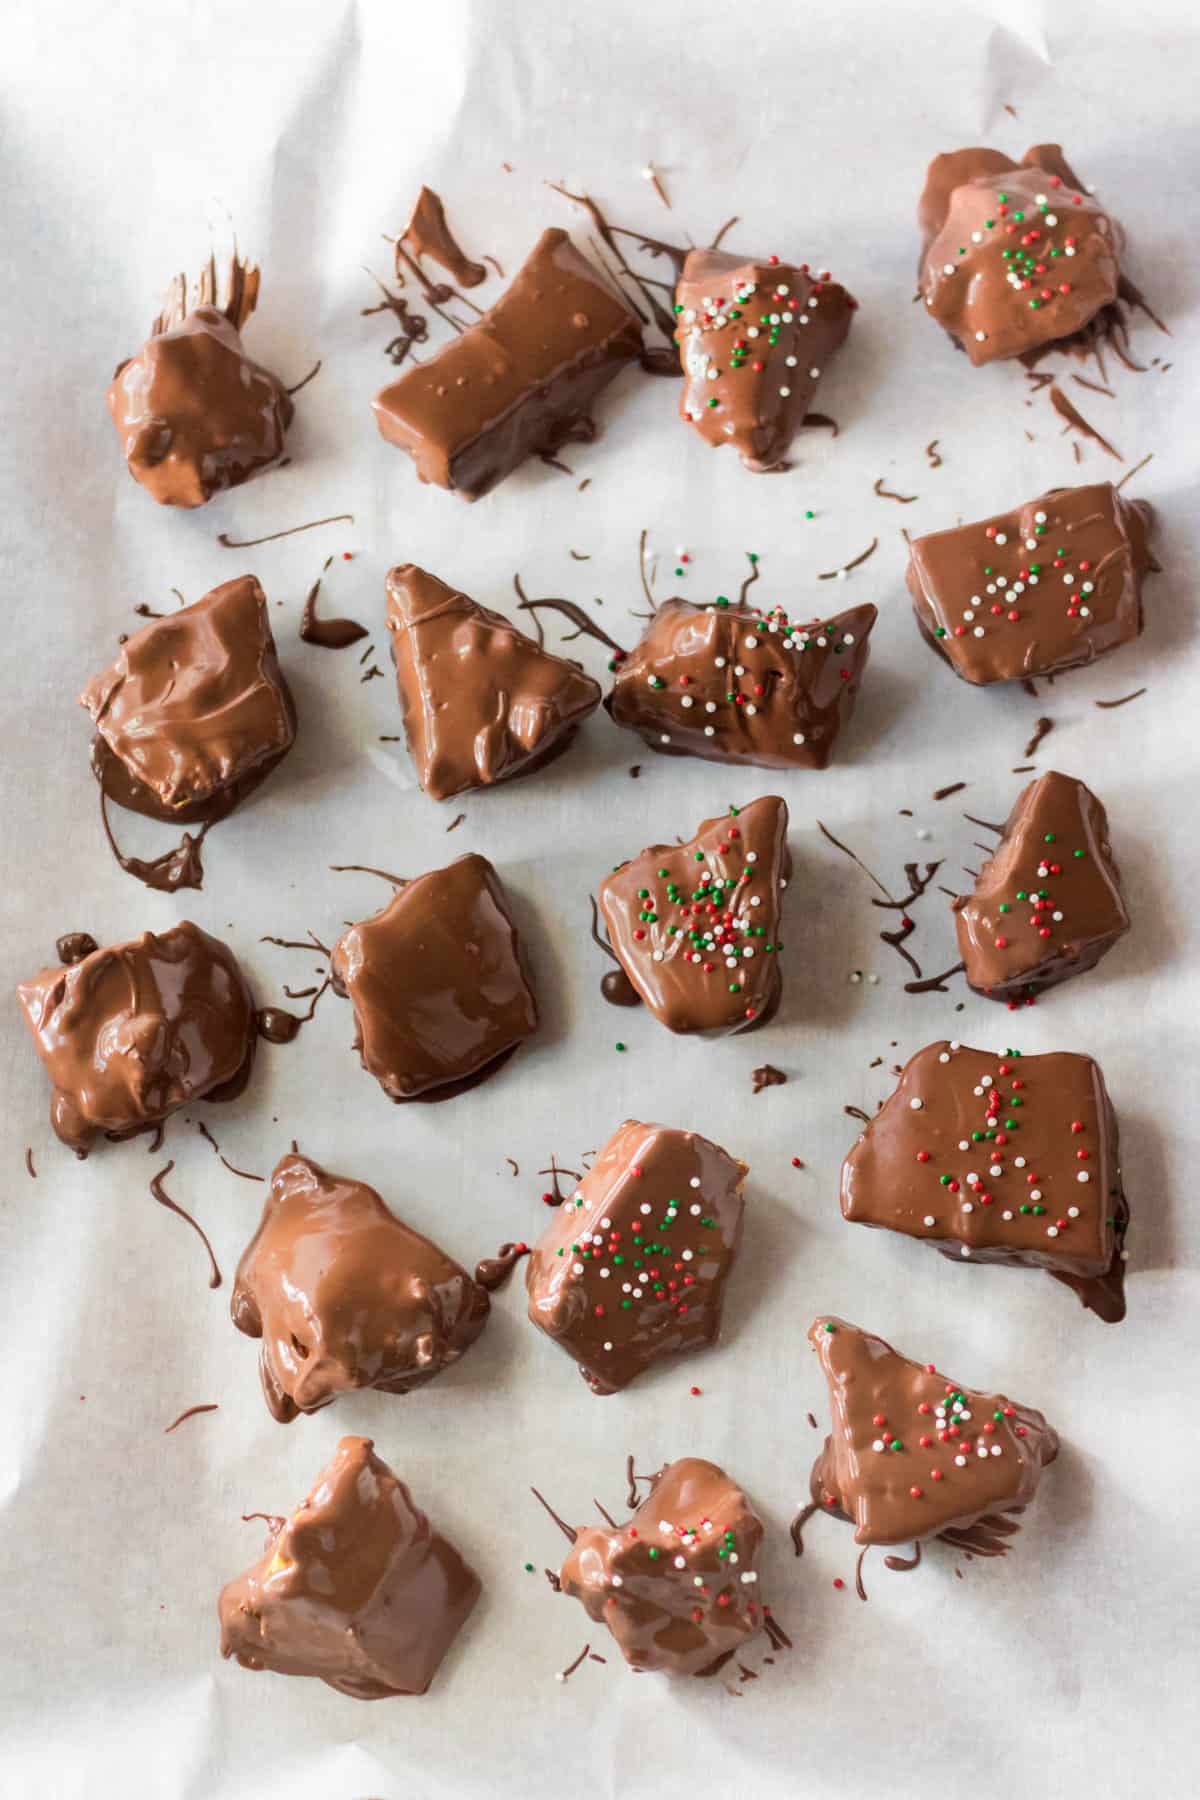 Chocolate covered honeycomb candy pieces on parchment paper.